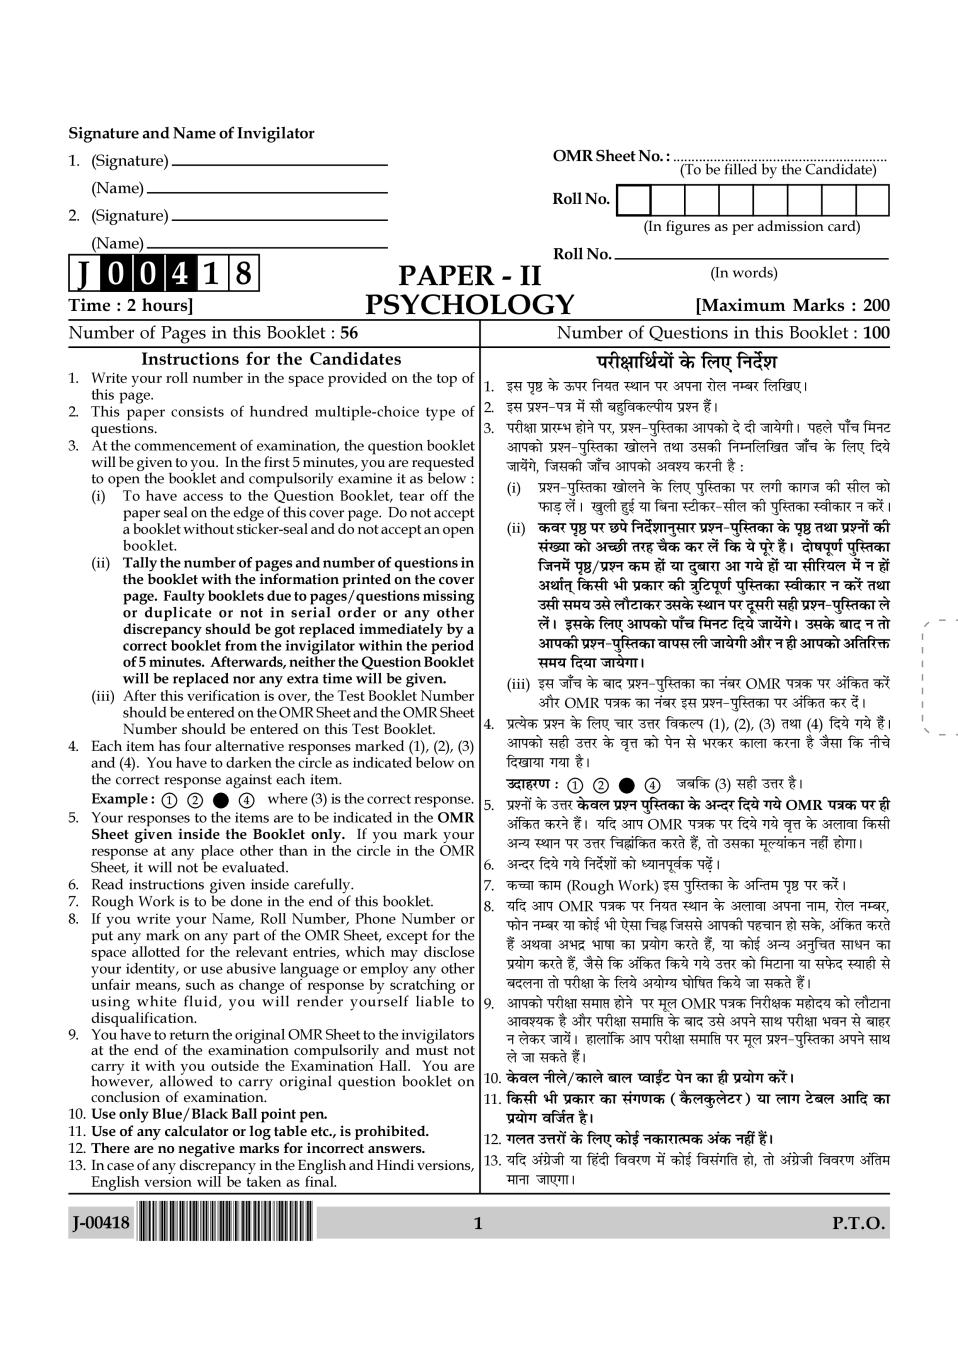 UGC NET Psychology Question Paper 2018 - Page 1